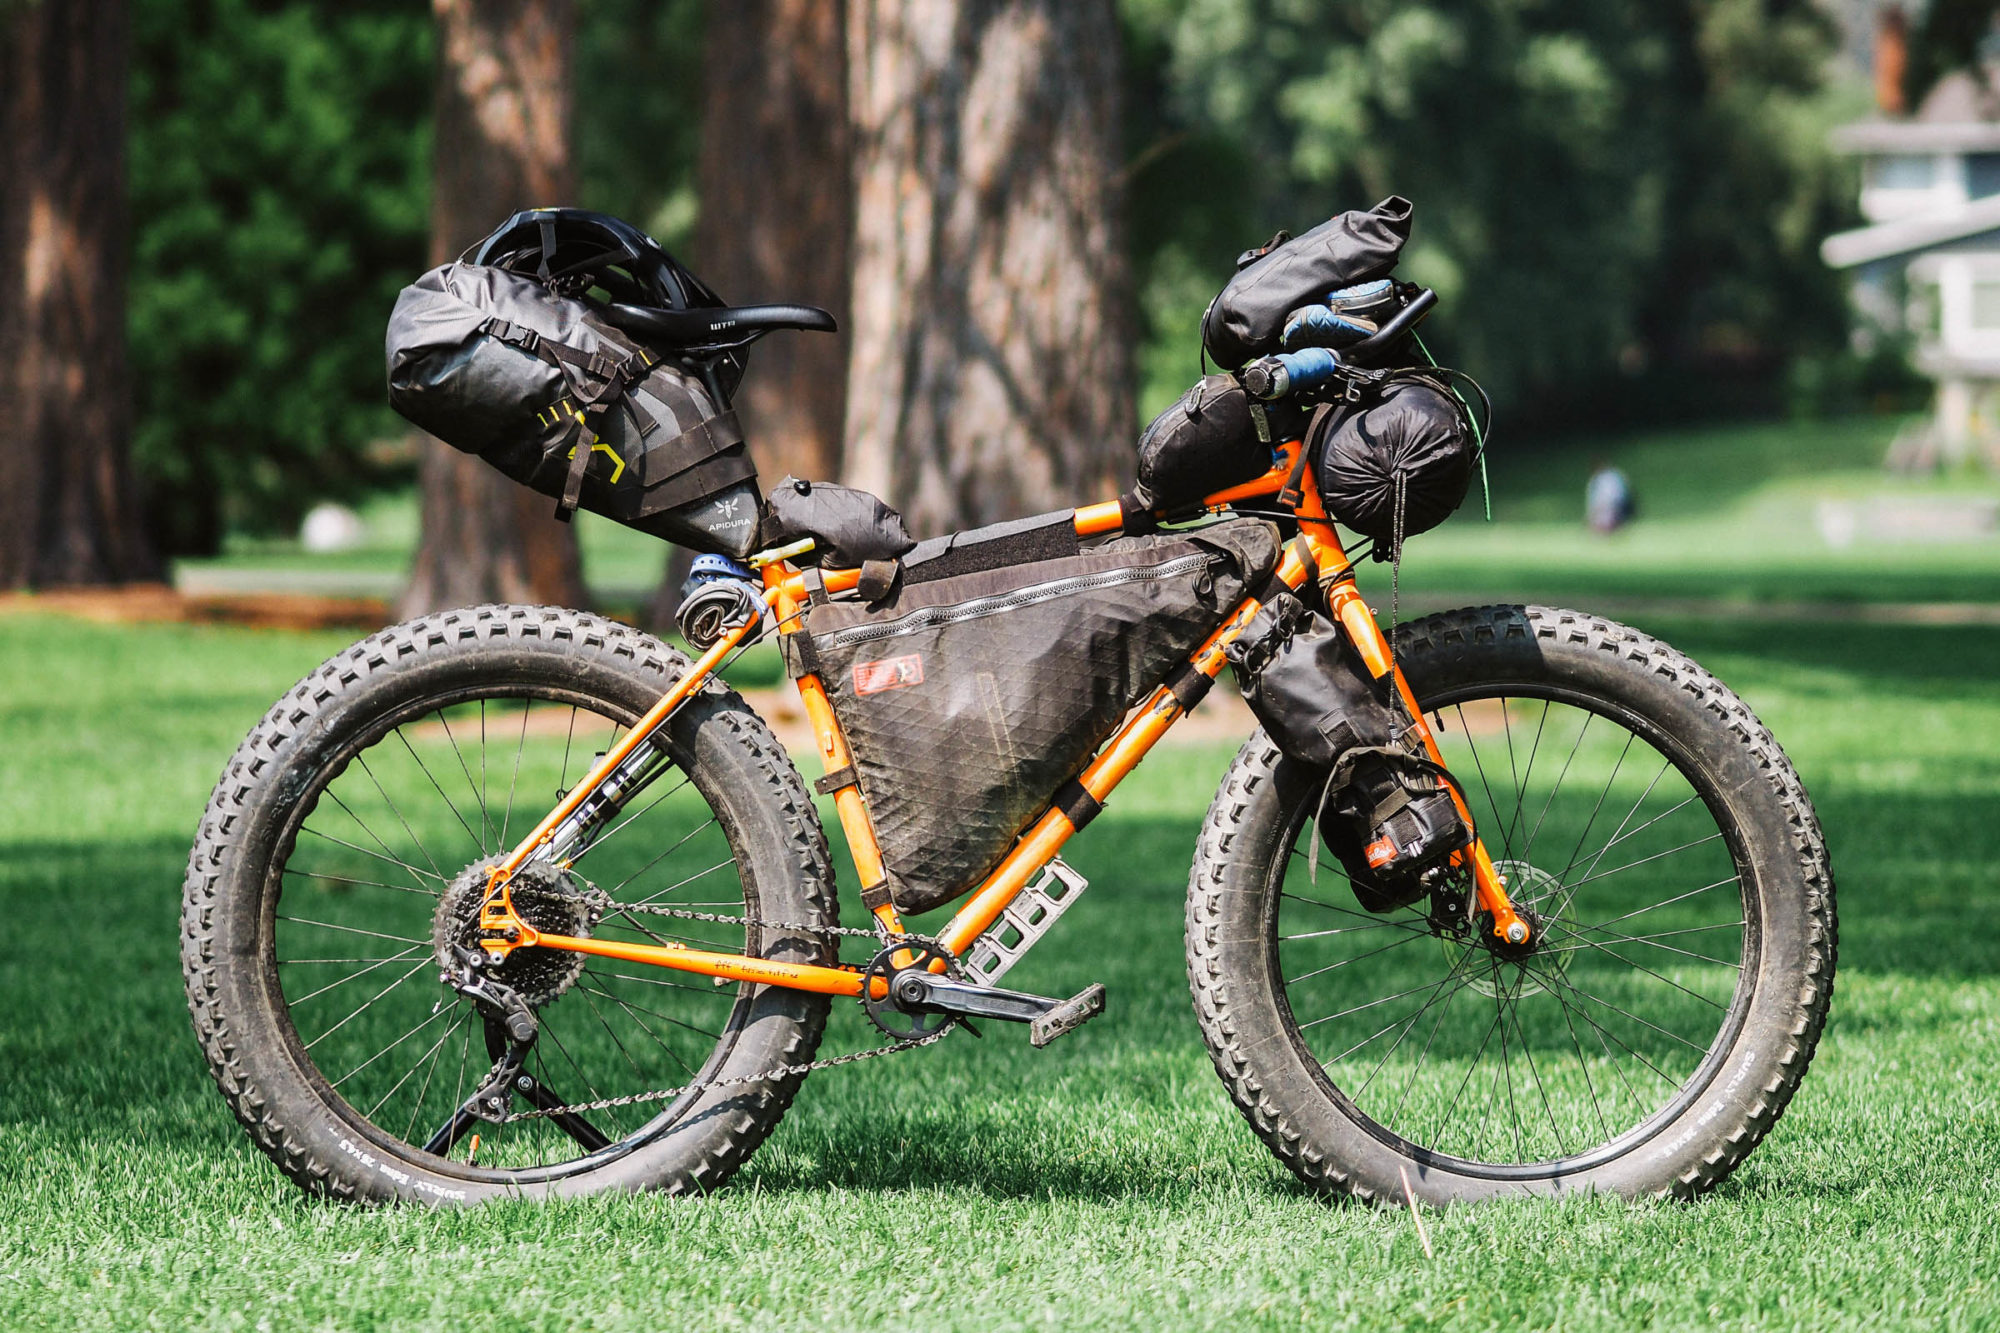 Ryan Carruth's Surly Pugsley